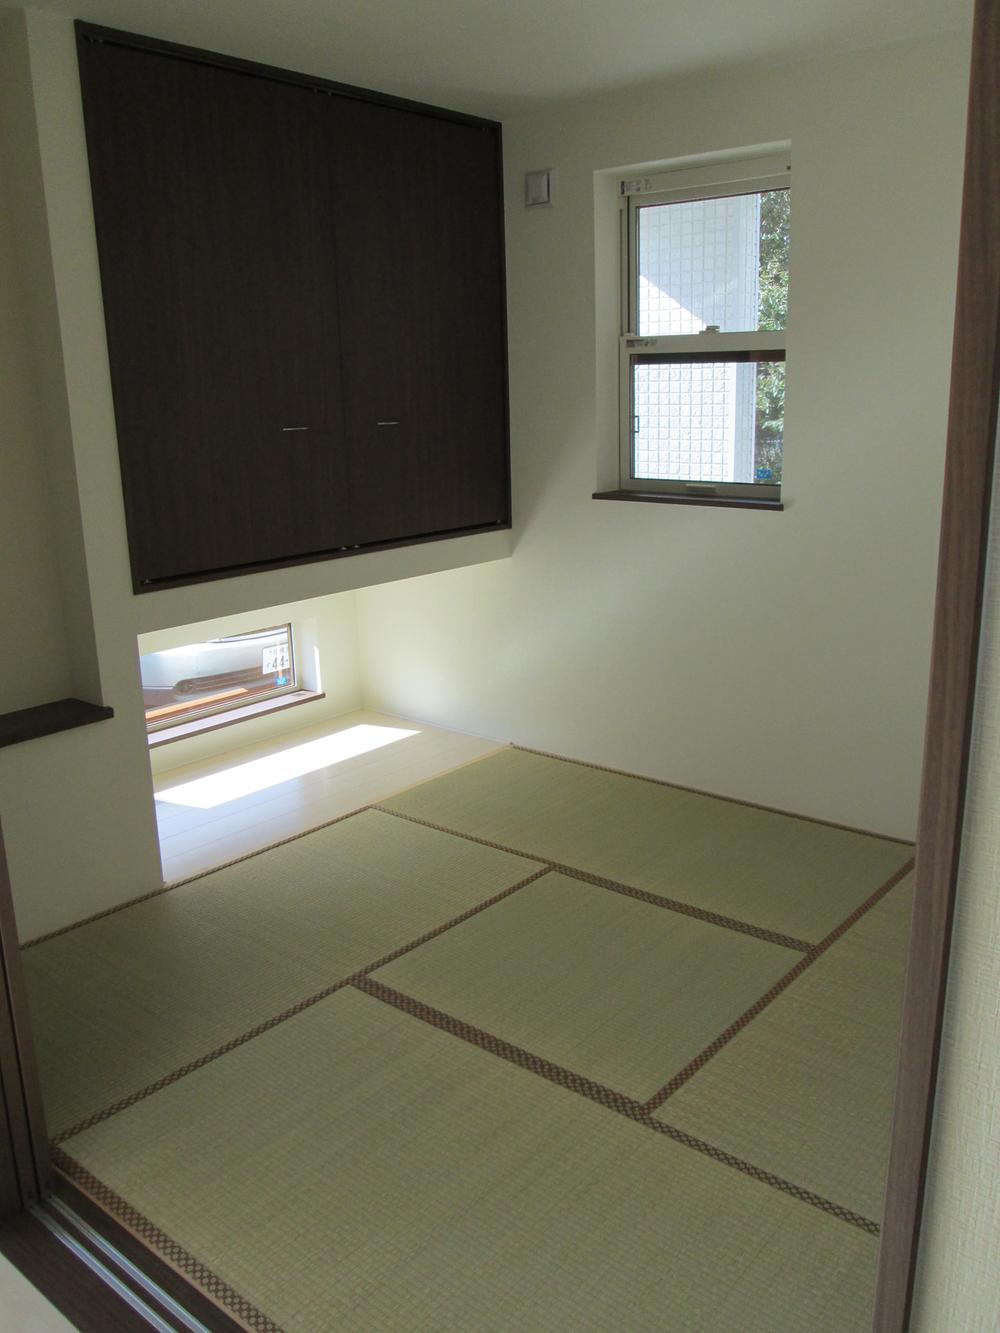 Non-living room. Japanese-style room with a window of Akaritori under the hanging storage